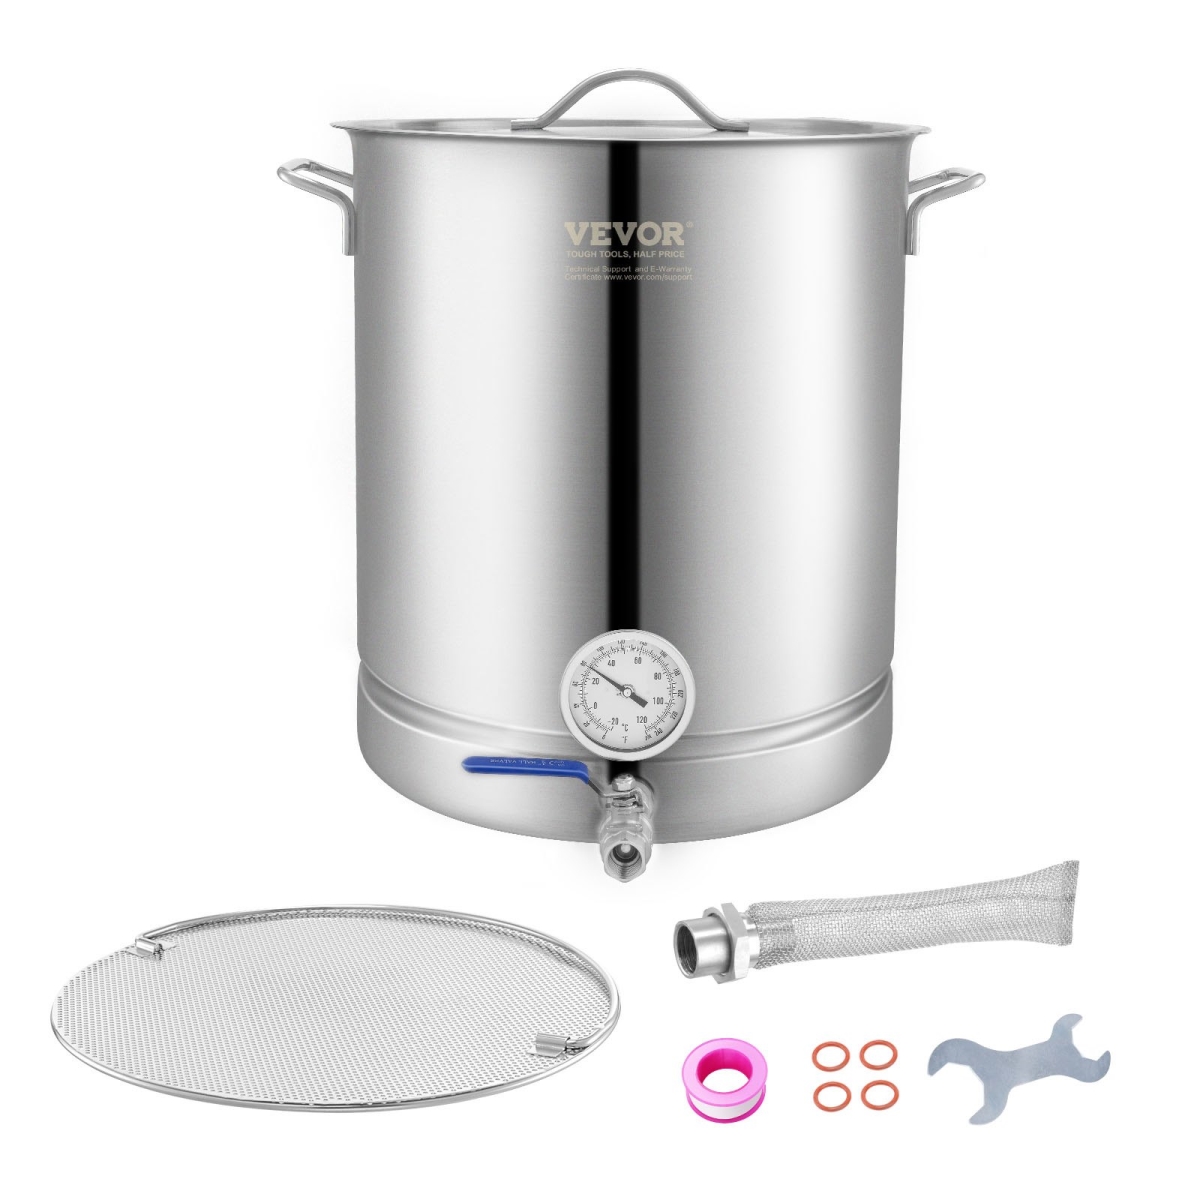 Picture of Vevor DWDJQFNJH16JRL3FKV0 16 gal Stainless Steel Kettle Brewing Pot with thermometer Tri Ply Bottom for Beer Brew Pot Home Brewing Supplies